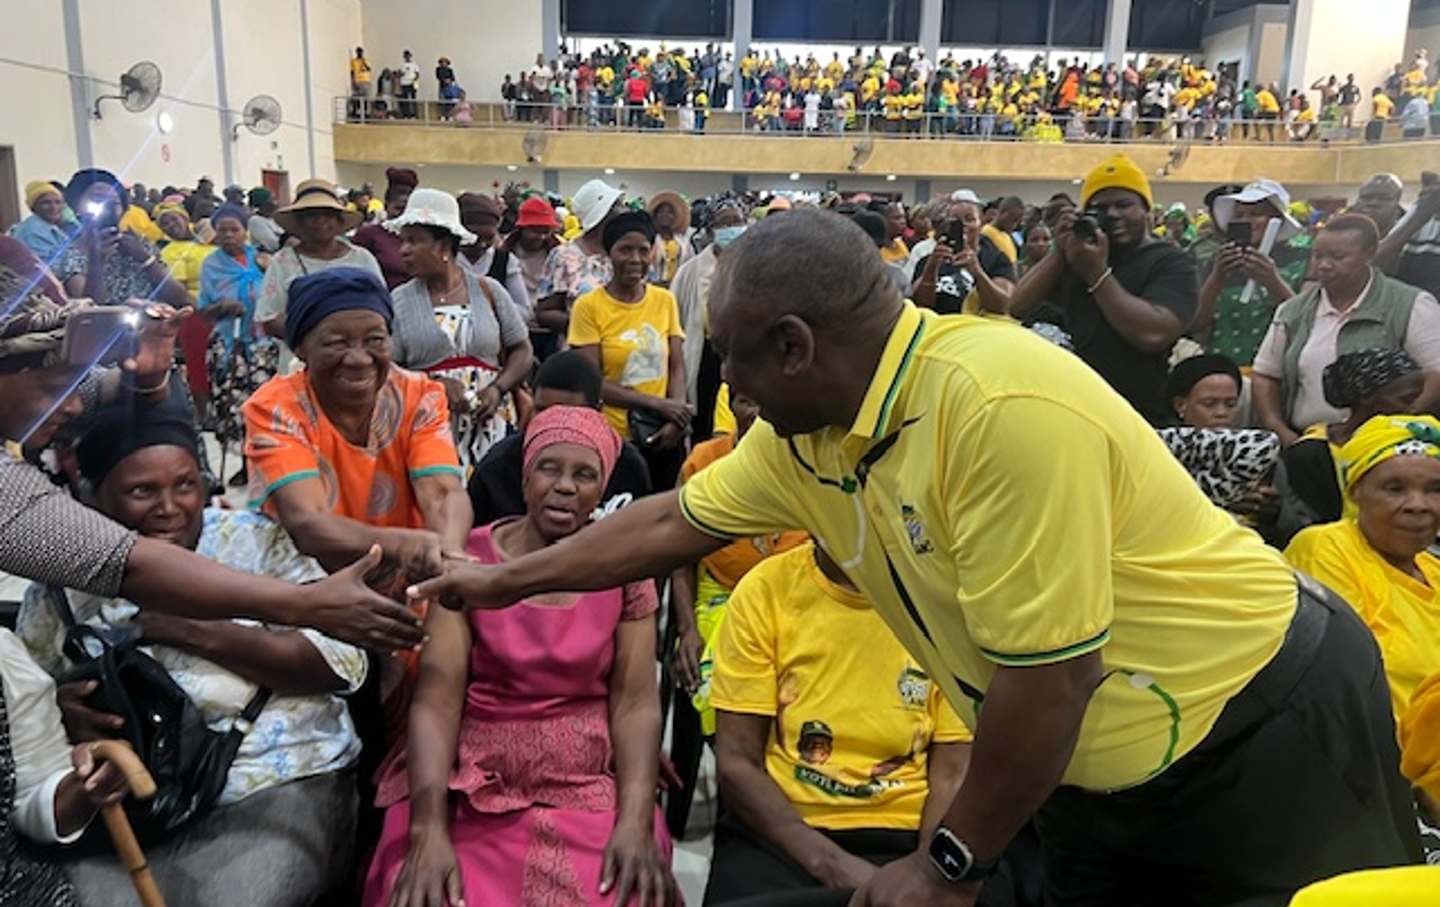 In the Face of Broad Disillusionment, the ANC Makes a Big Push to Gain Majority Support in South Africa’s Election